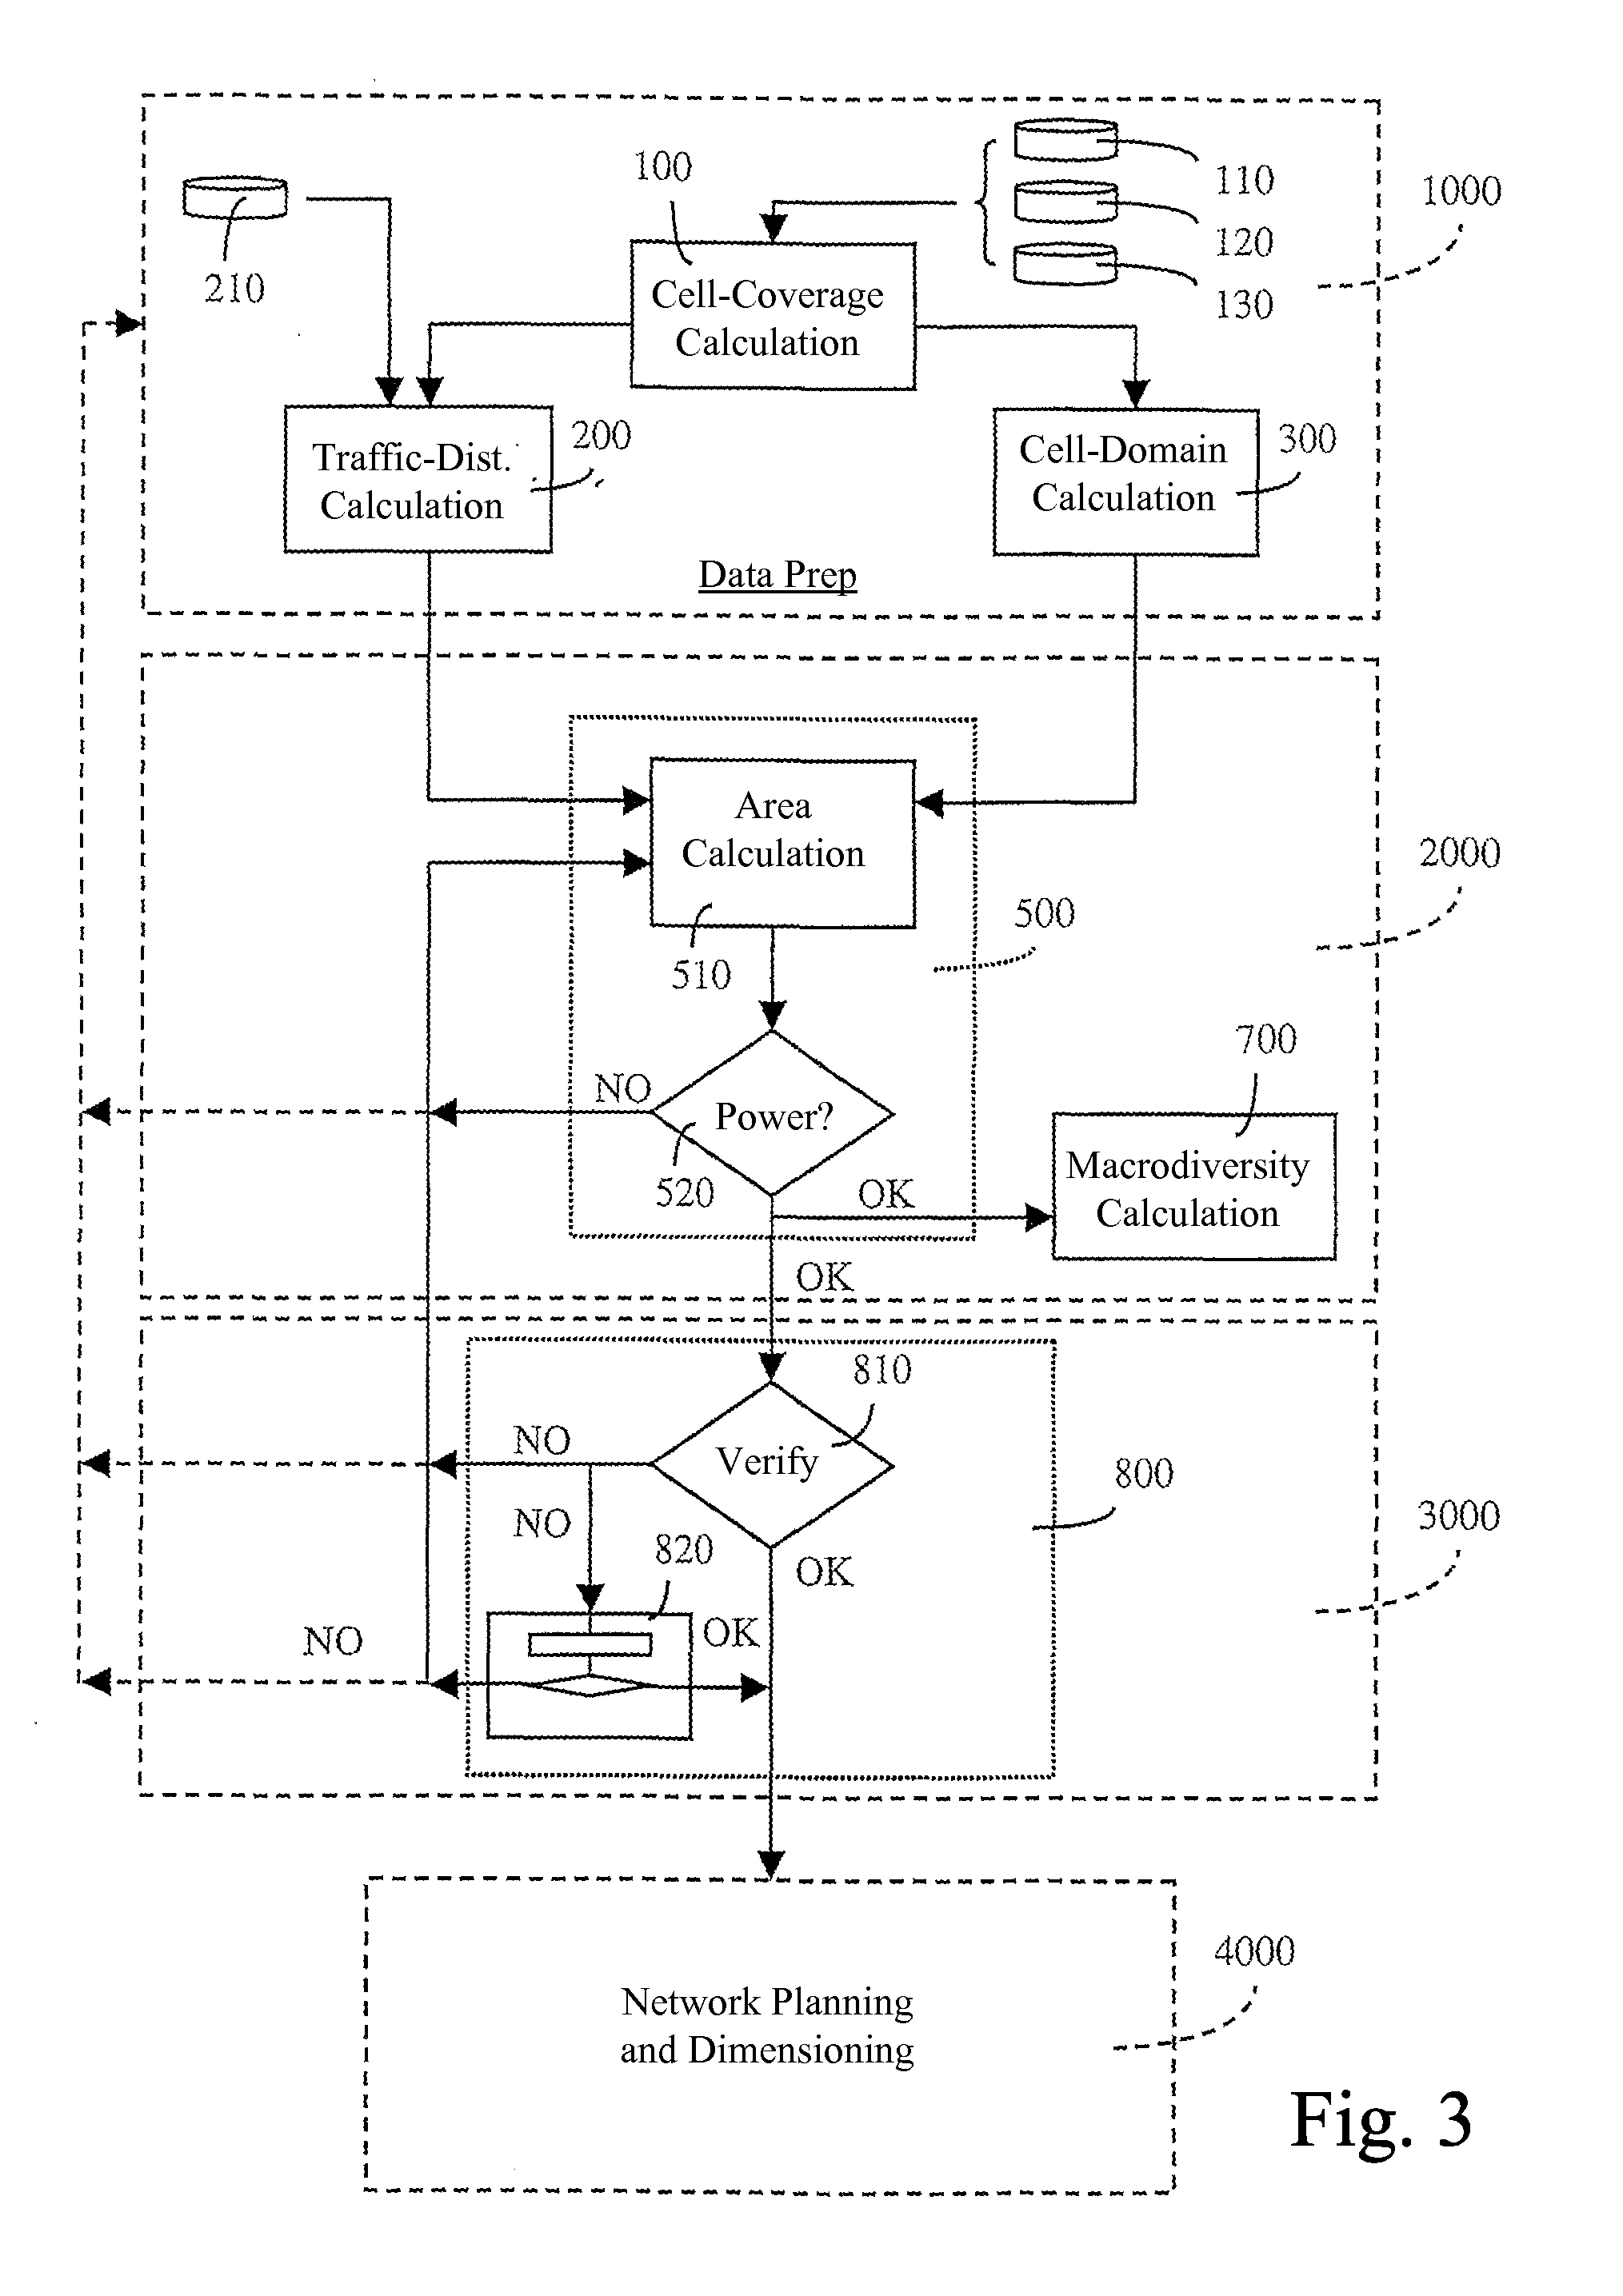 System and method for planning a telecommunications network for mobile terminals